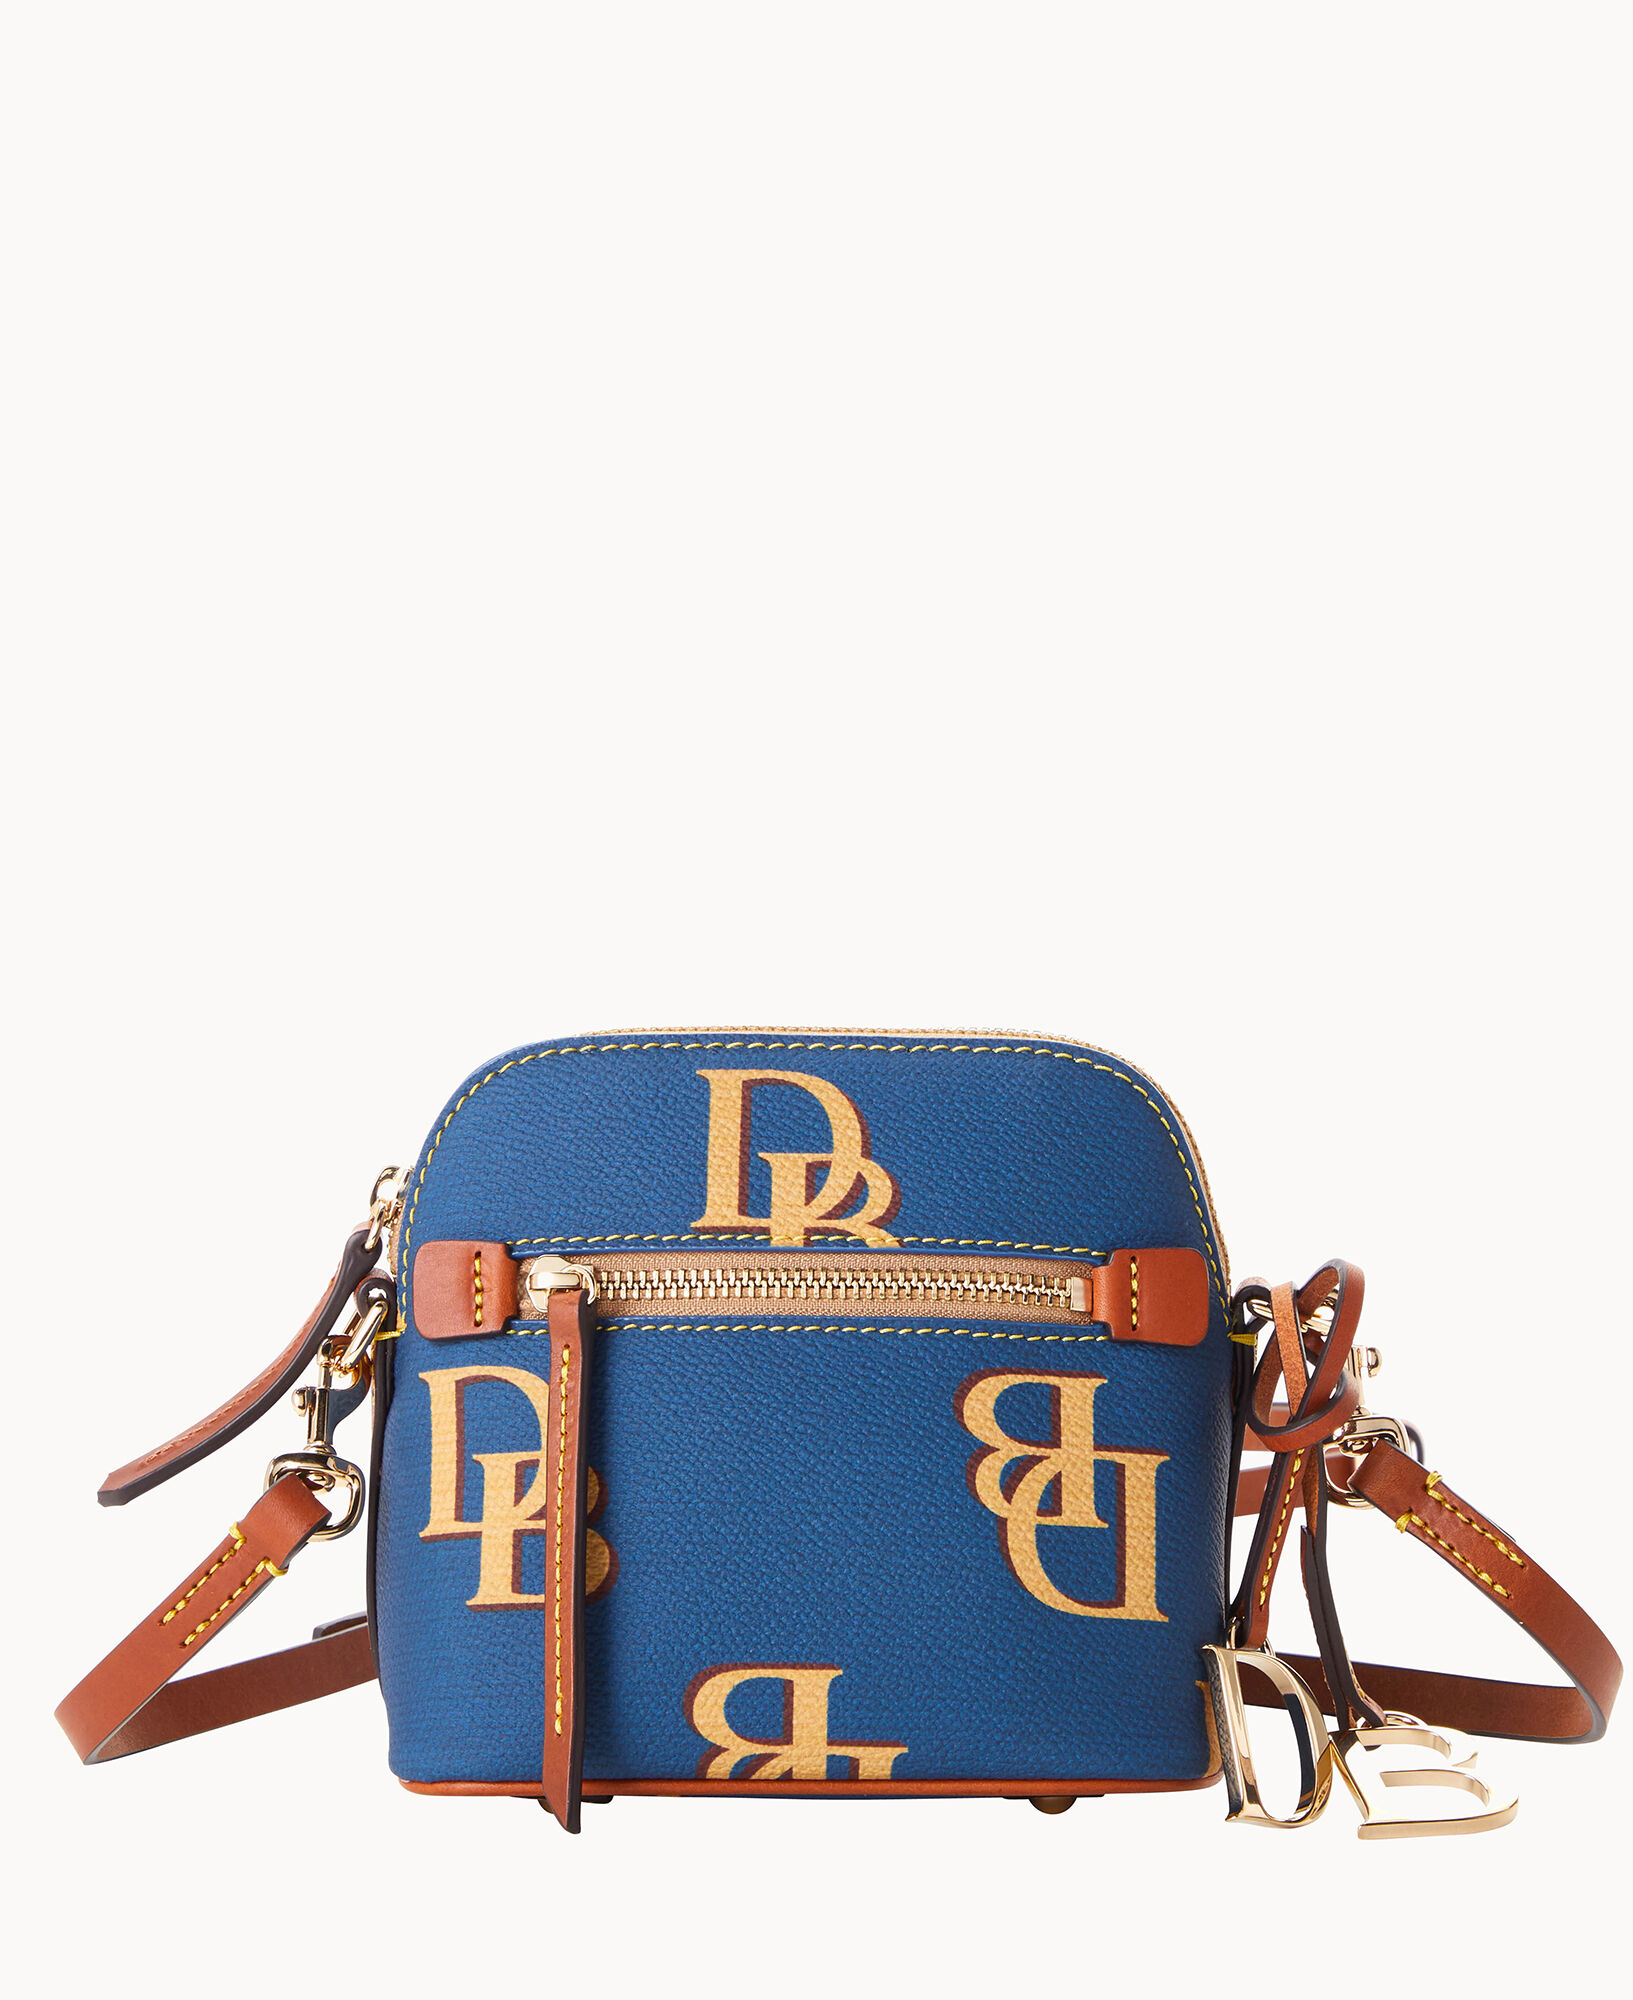 A monogrammed Louis Vuitton bag in all hues (and for many moods